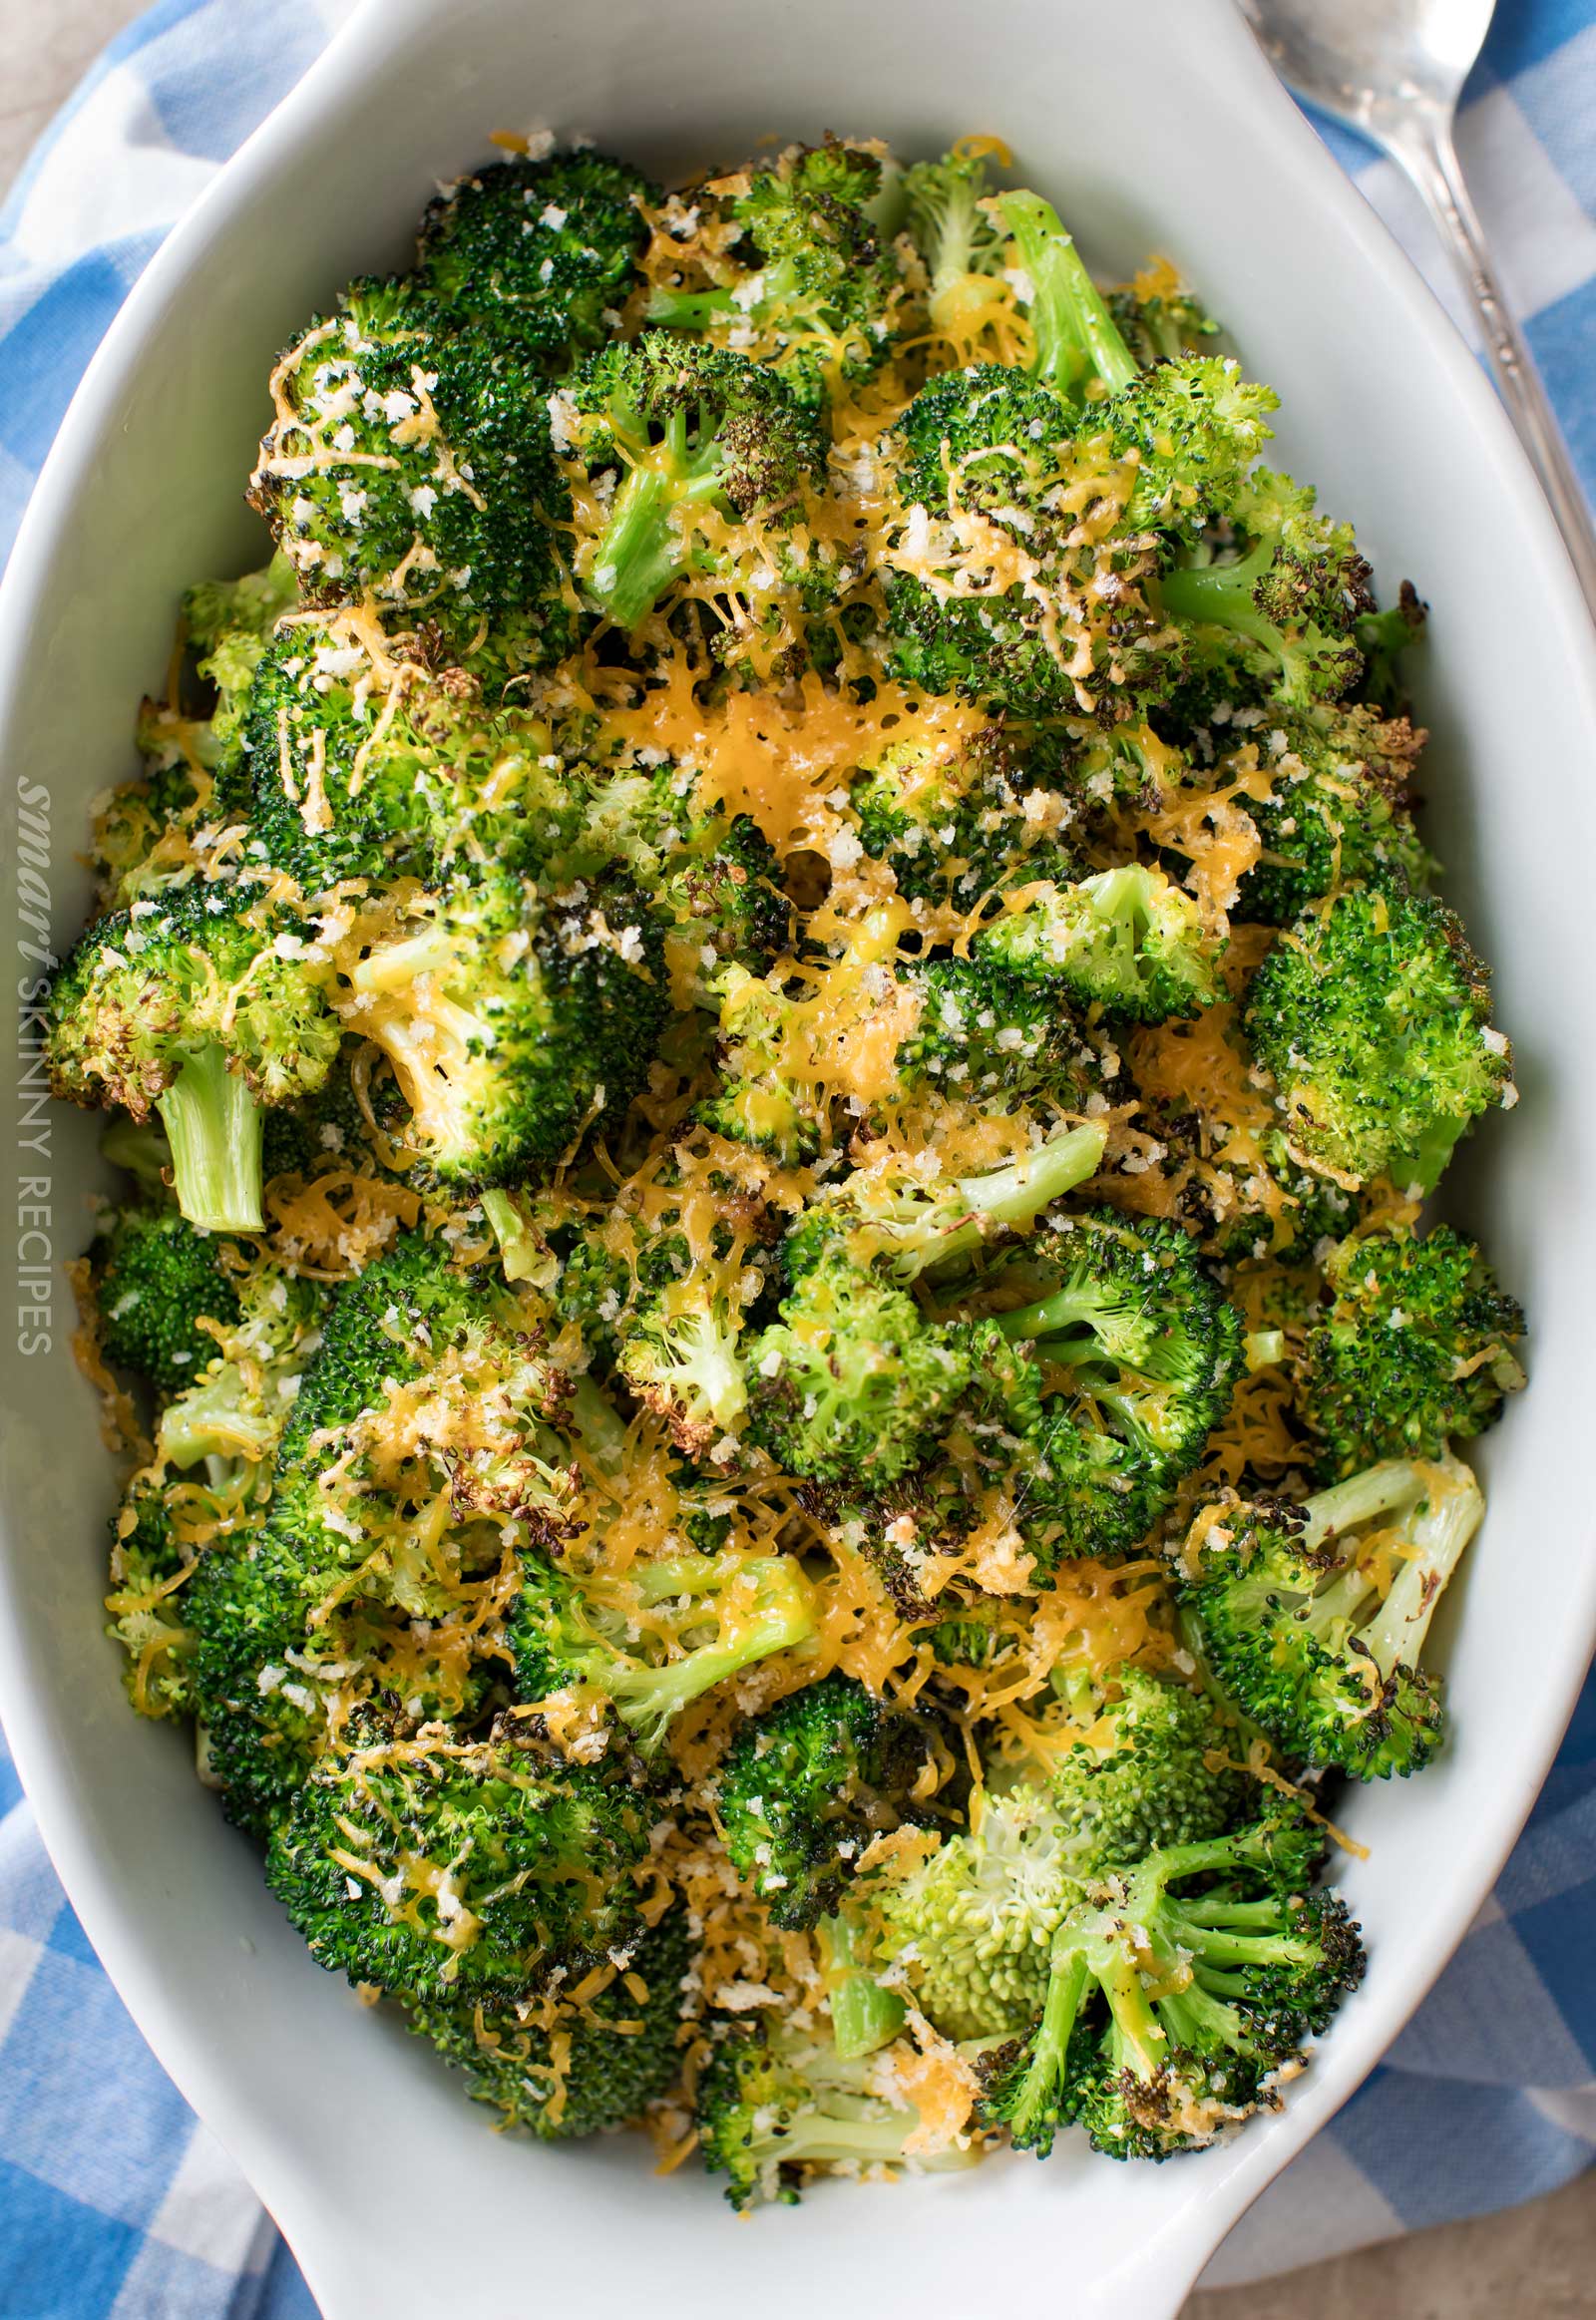 Kid-Friendly Broccoli Delights: Creative and Delicious Ways to Get Your Little Ones Excited About Eating This Superfood!